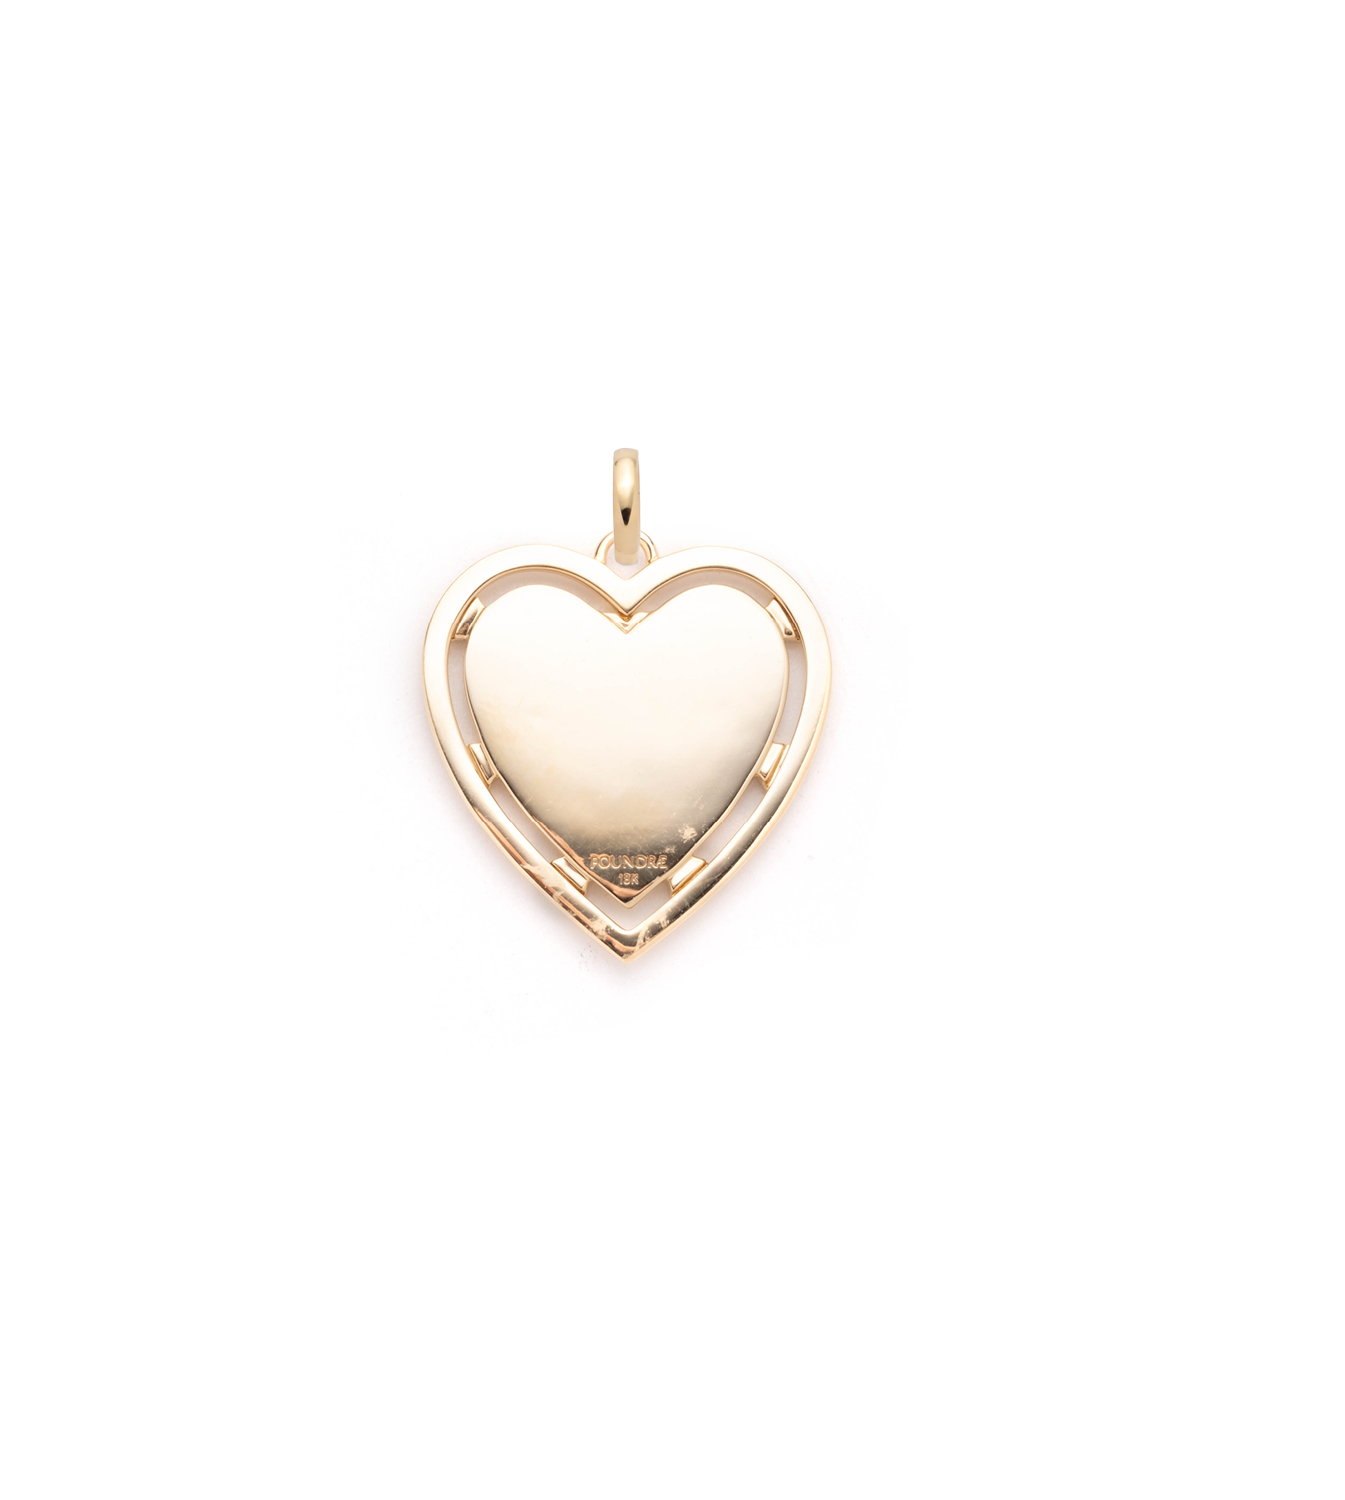 Heart - True Love : Engravable Large Heart Medallion with Oval Pushgate